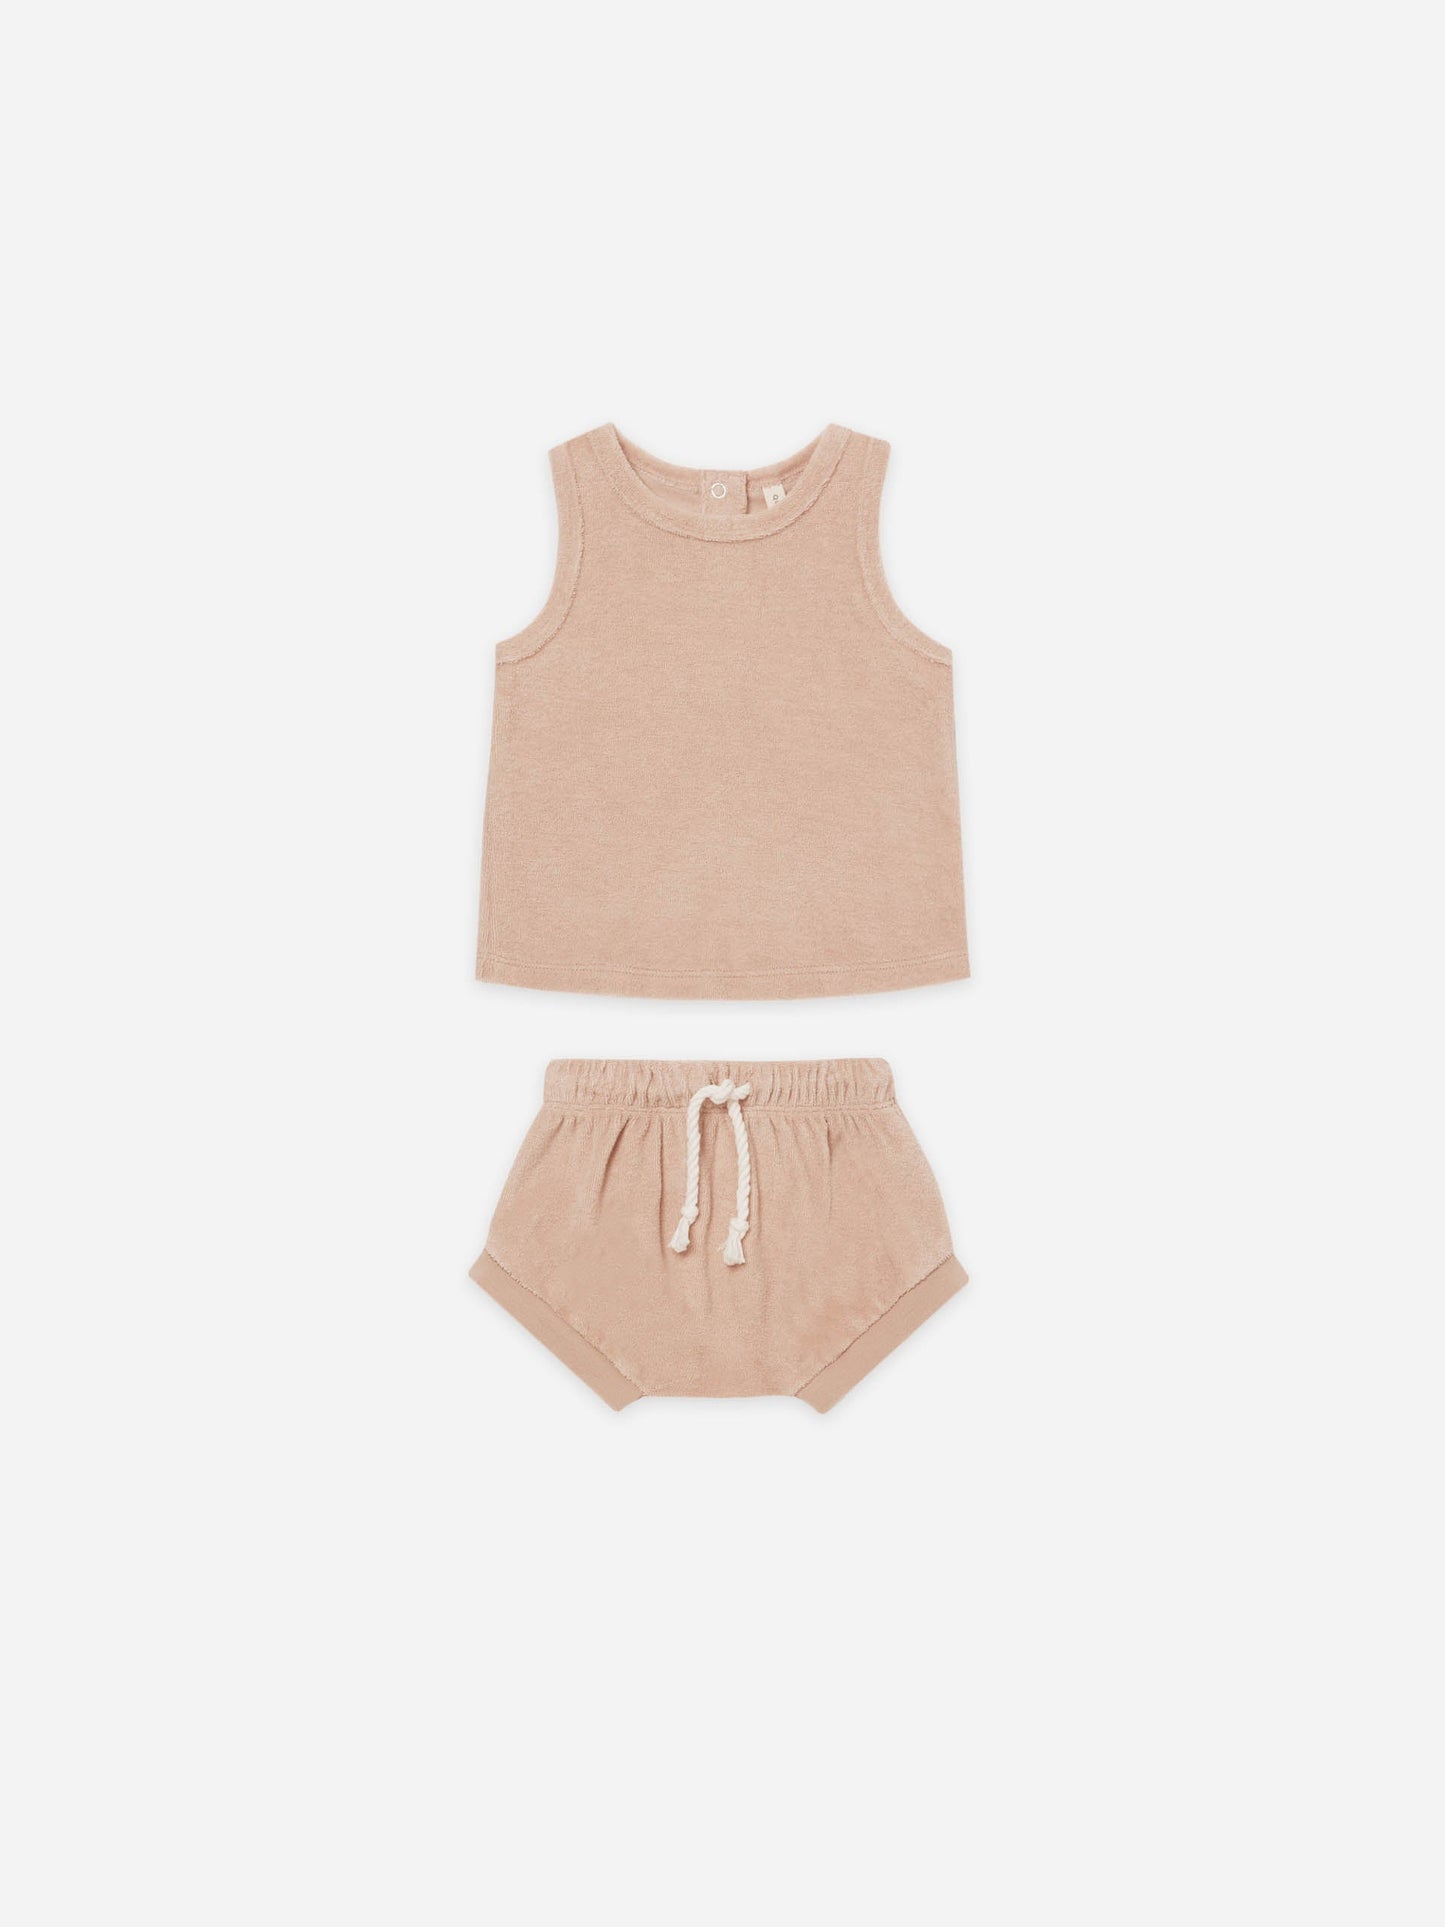 Quincy Mae infant terry tank + shorts set